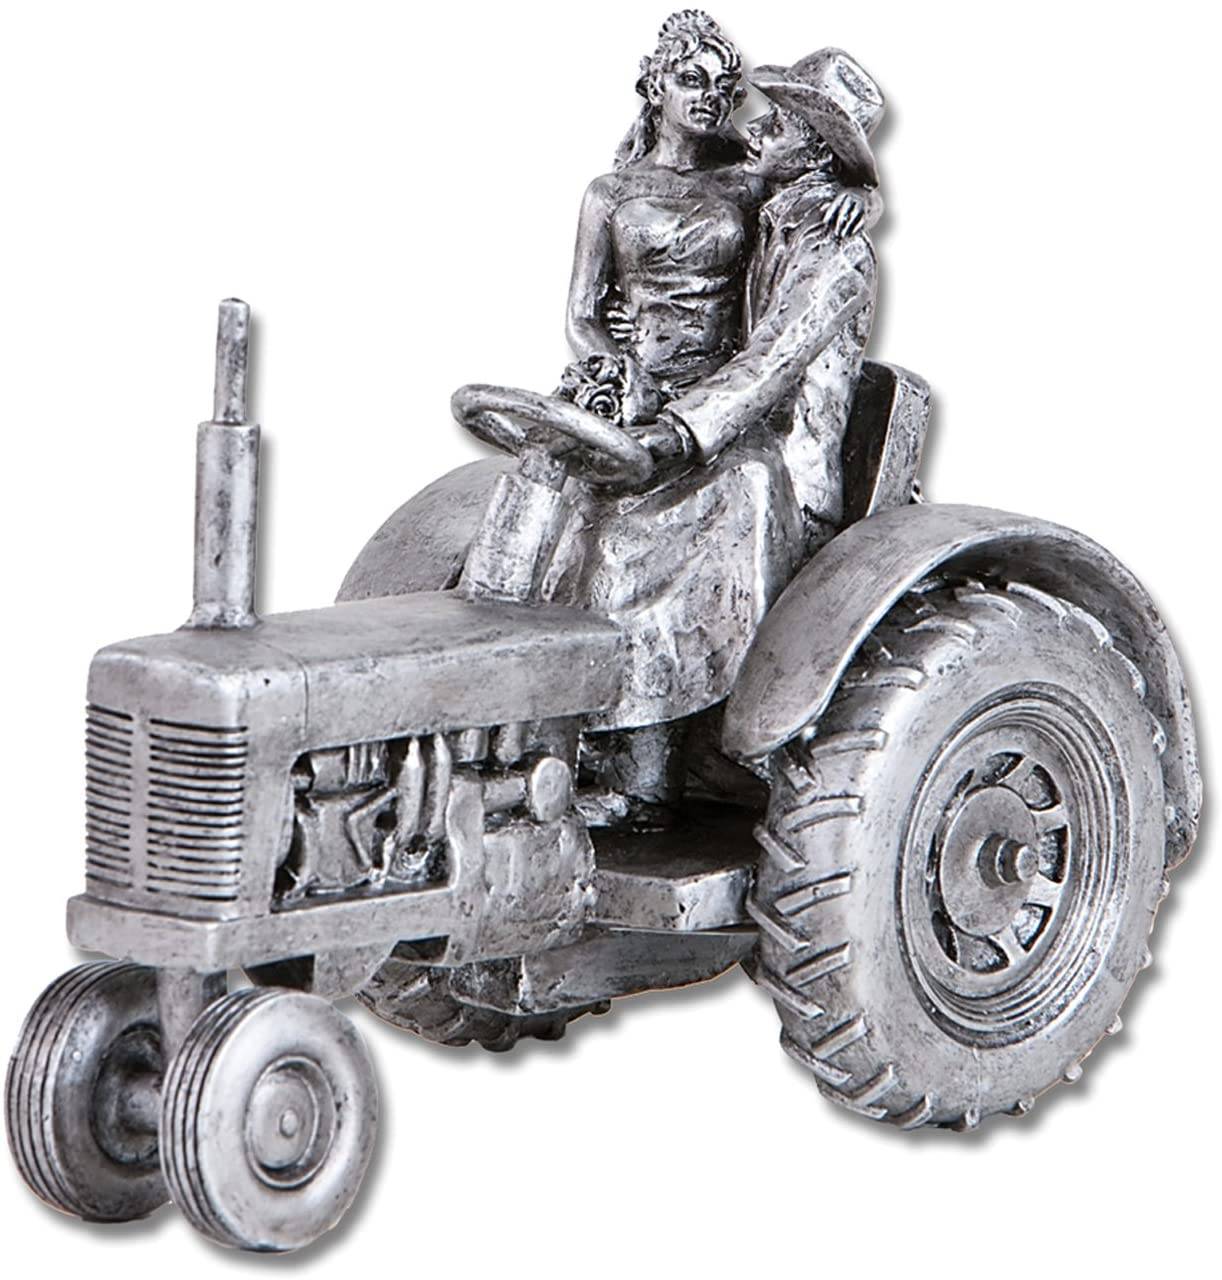 Western Cake Top Tractor Antique Silver Montana Silversmiths Just Hitched 